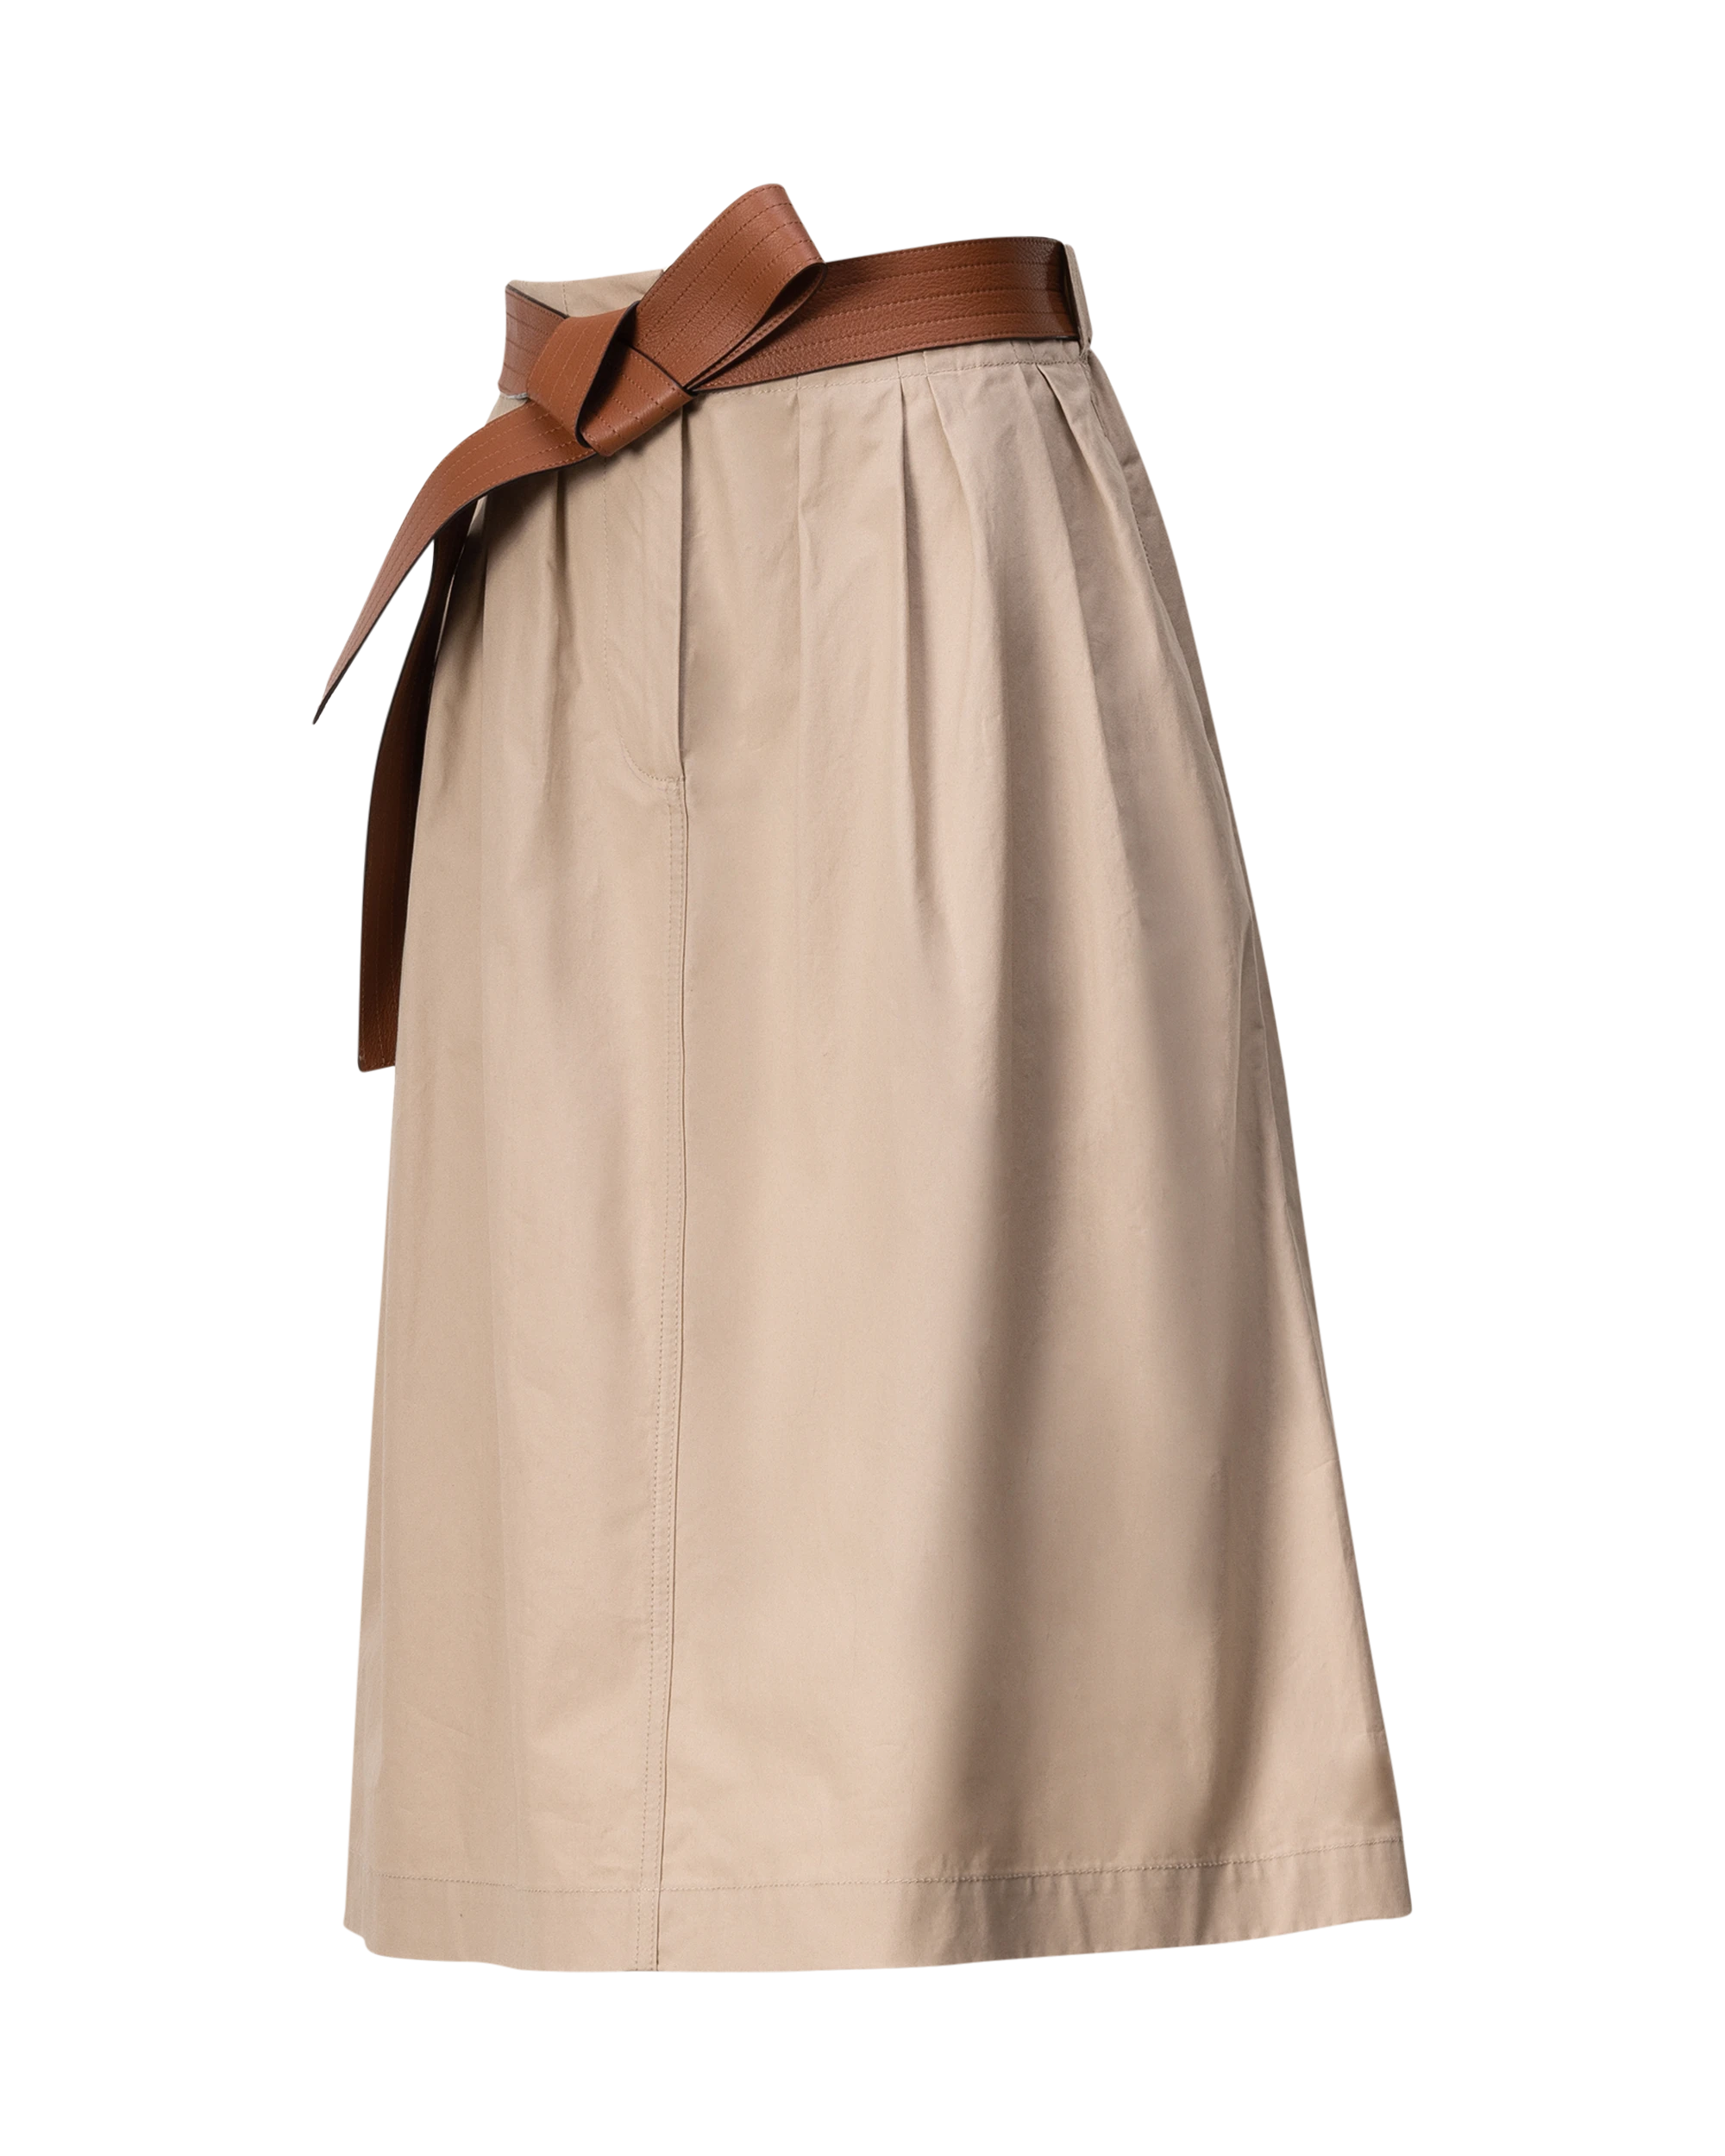 Belted A-Line Midi Skirt